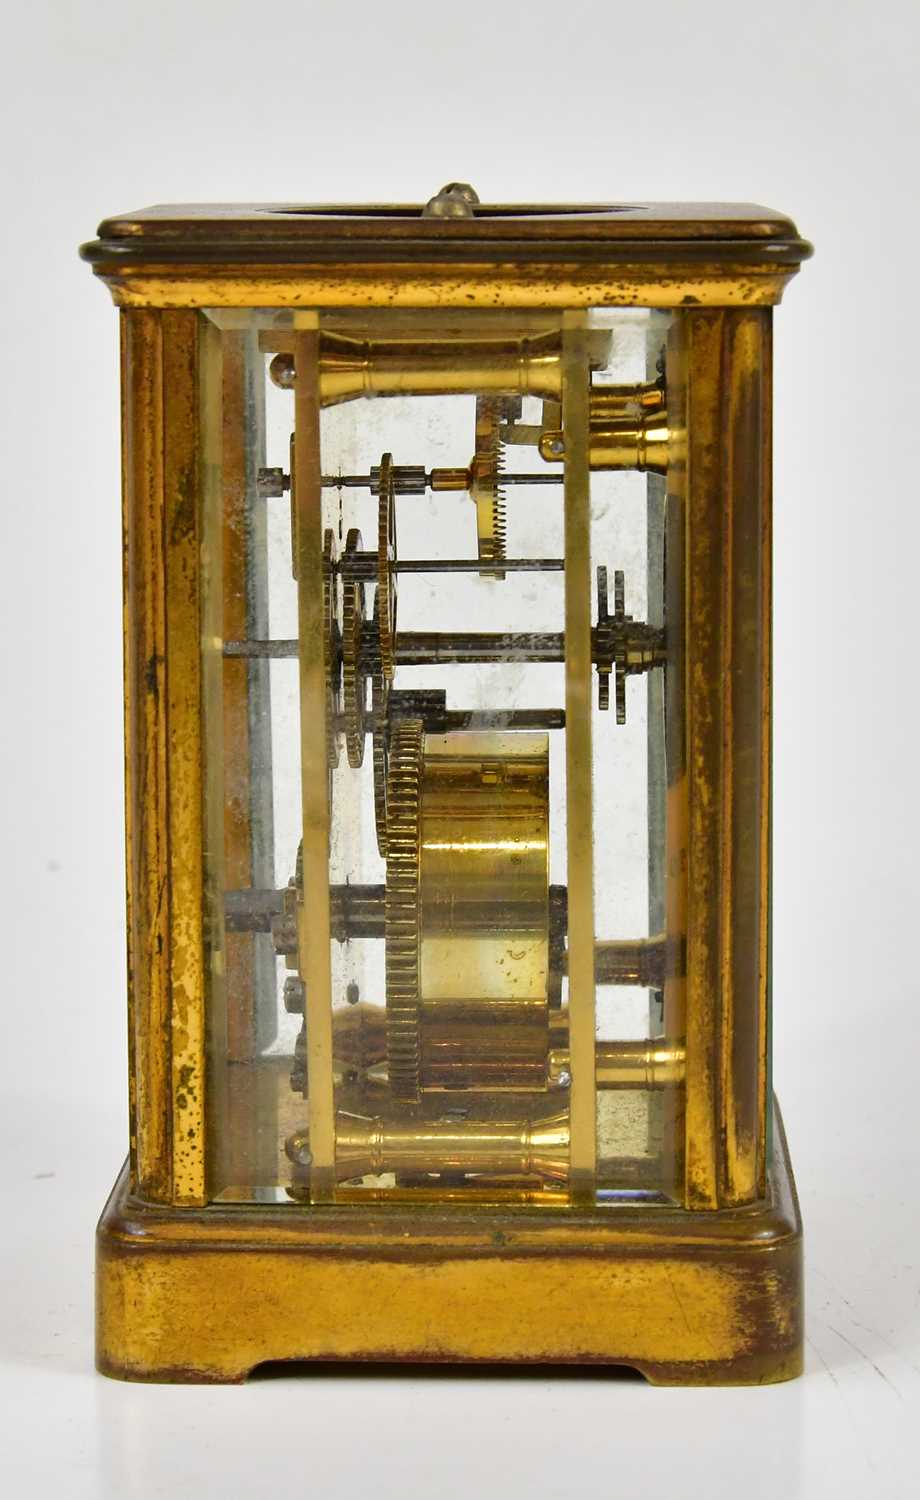 A late 19th century brass cased carriage clock, the enamel dial bearing Arabic and Roman numerals, - Image 4 of 4